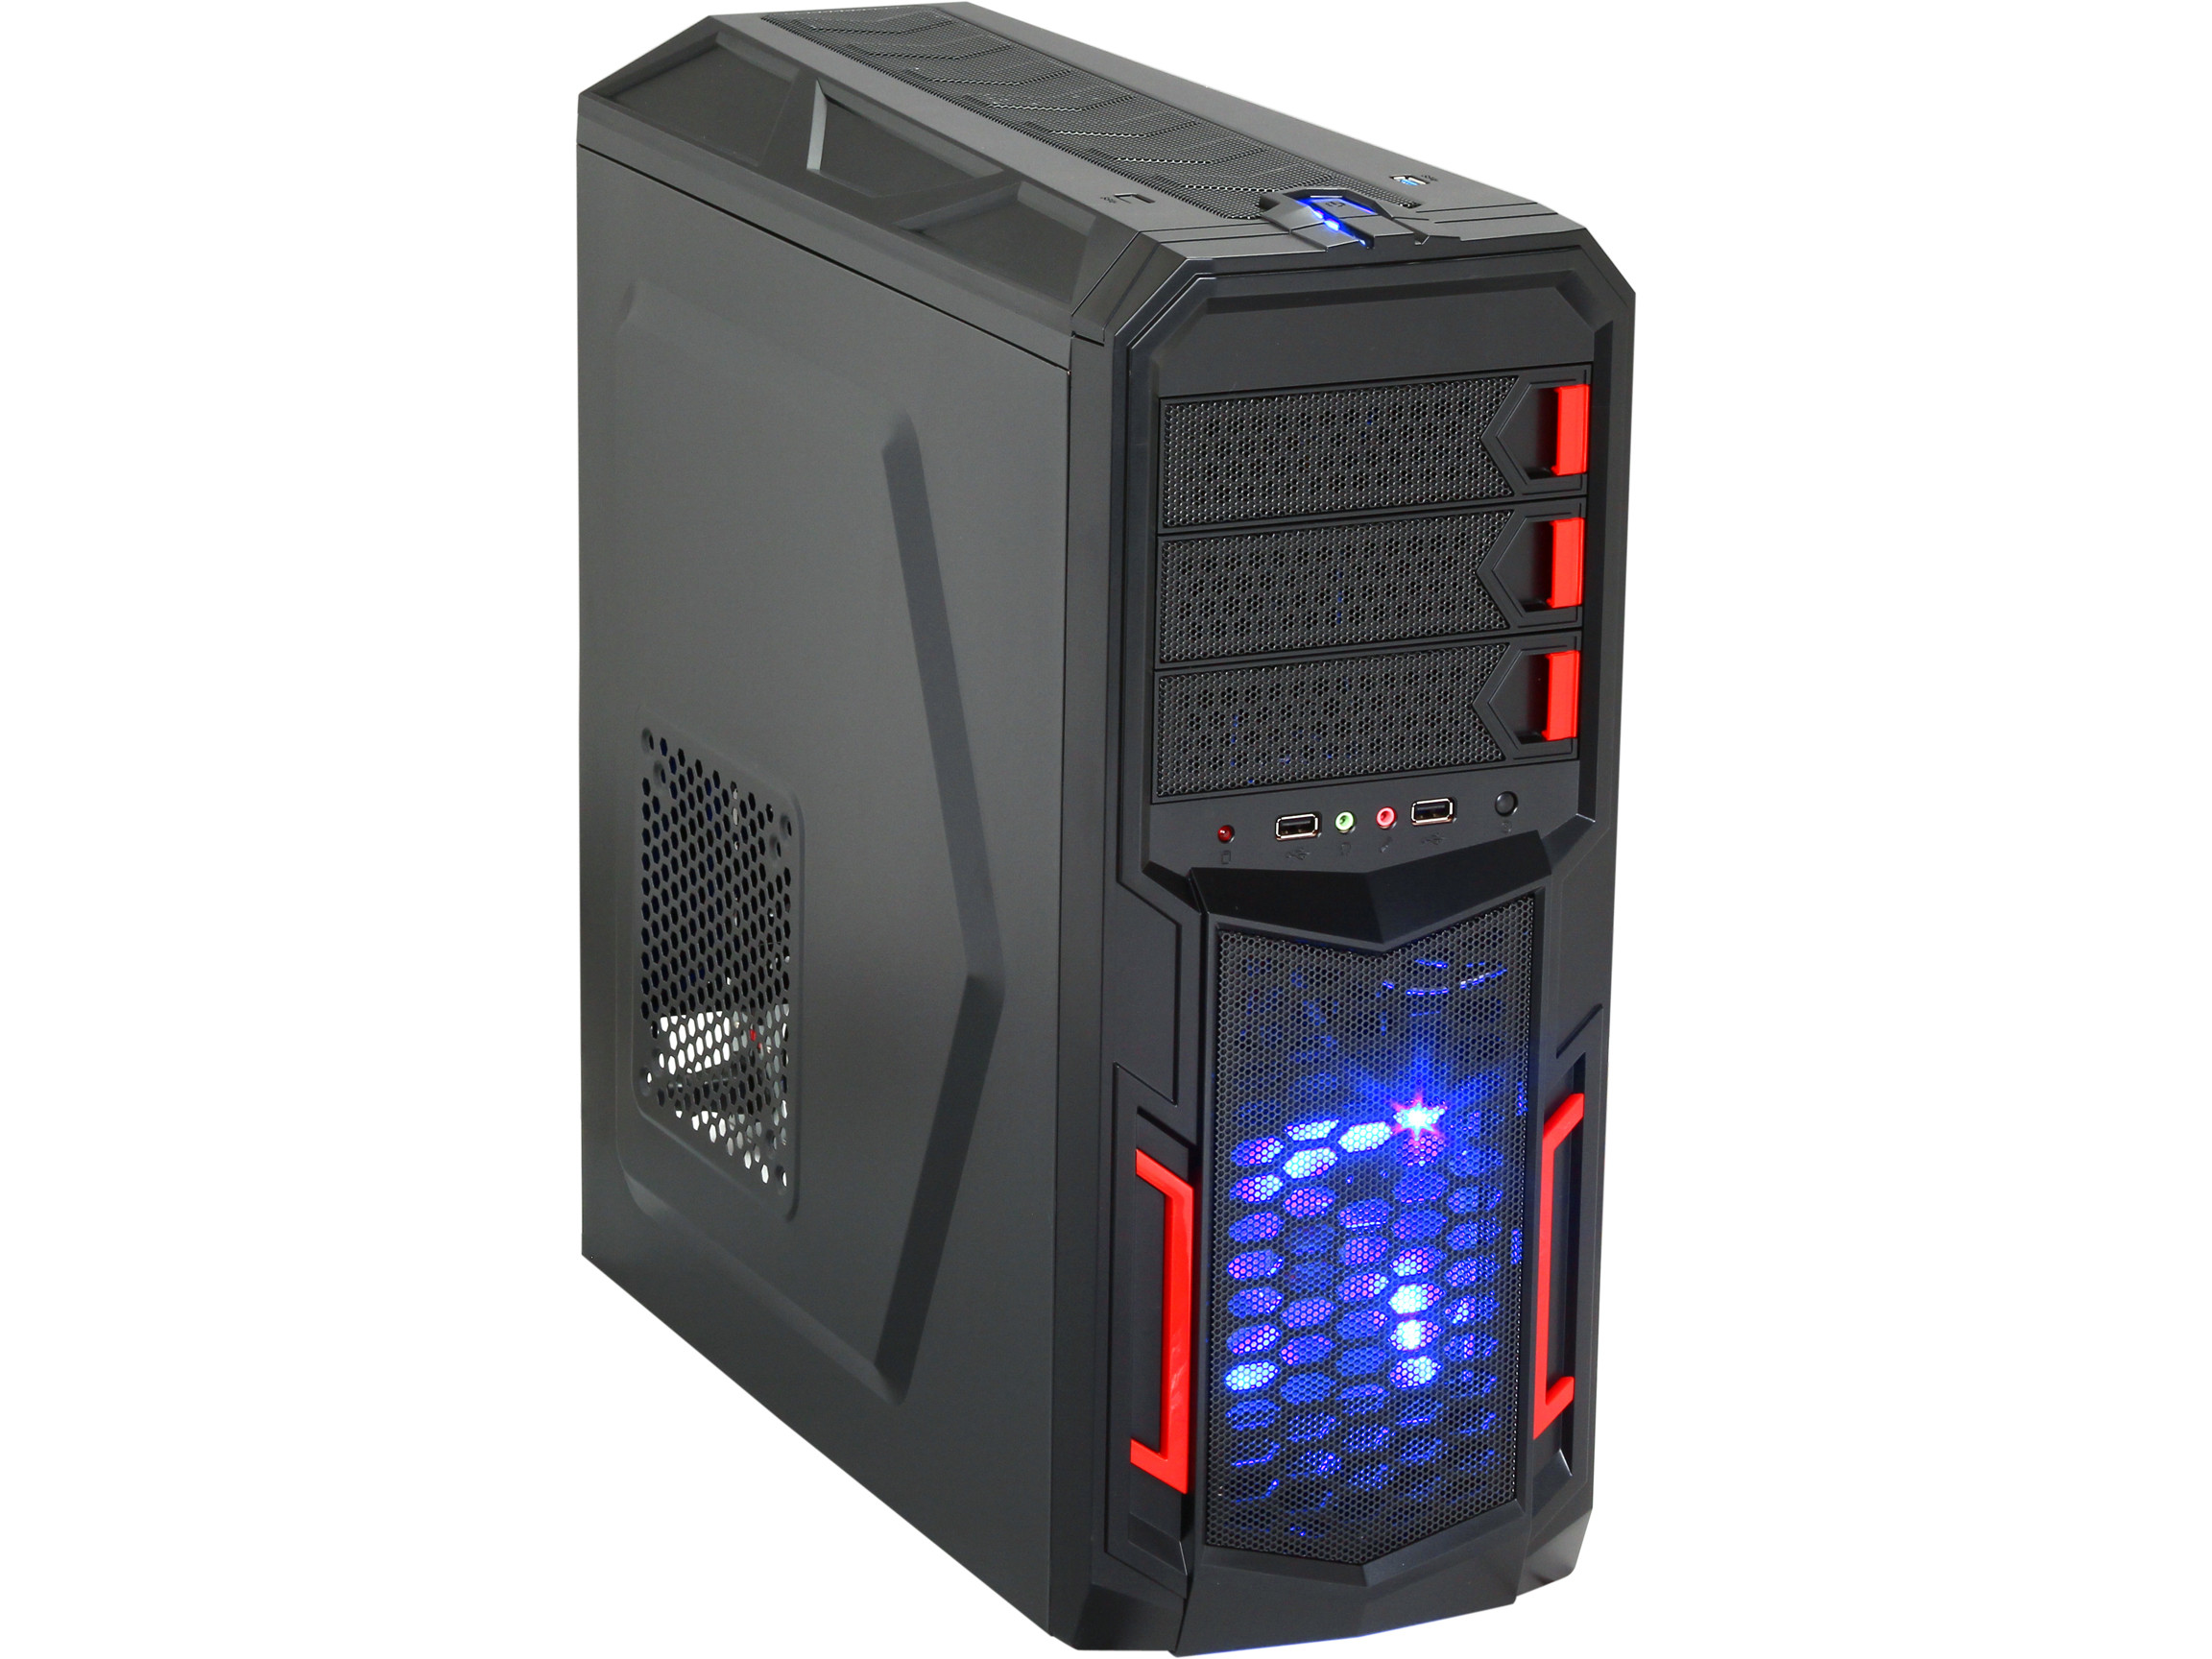 Rosewill Galaxy Series Gaming Cases Launched | techPowerUp